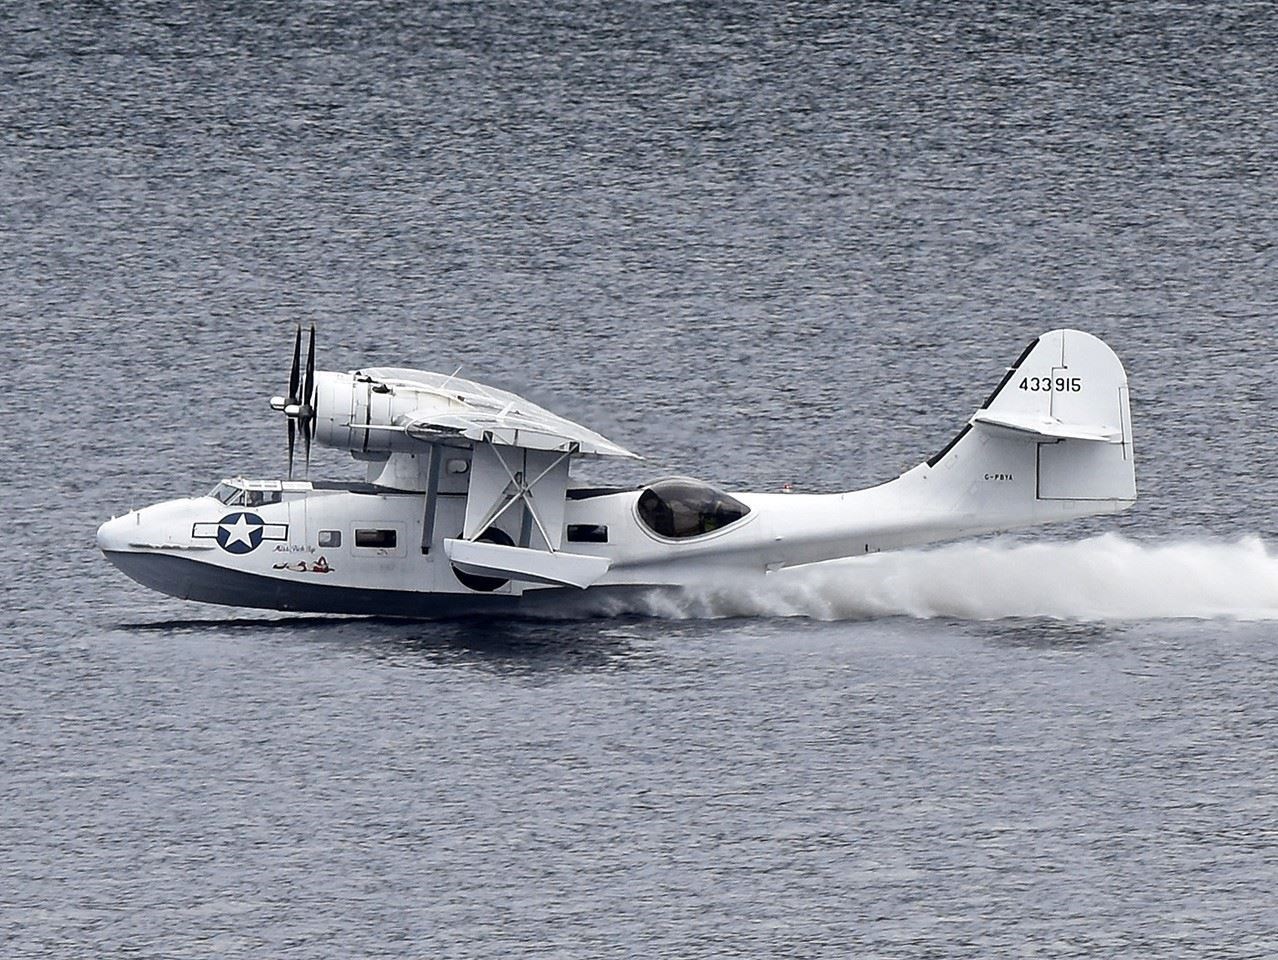 The stranded Catalina is flying high once more